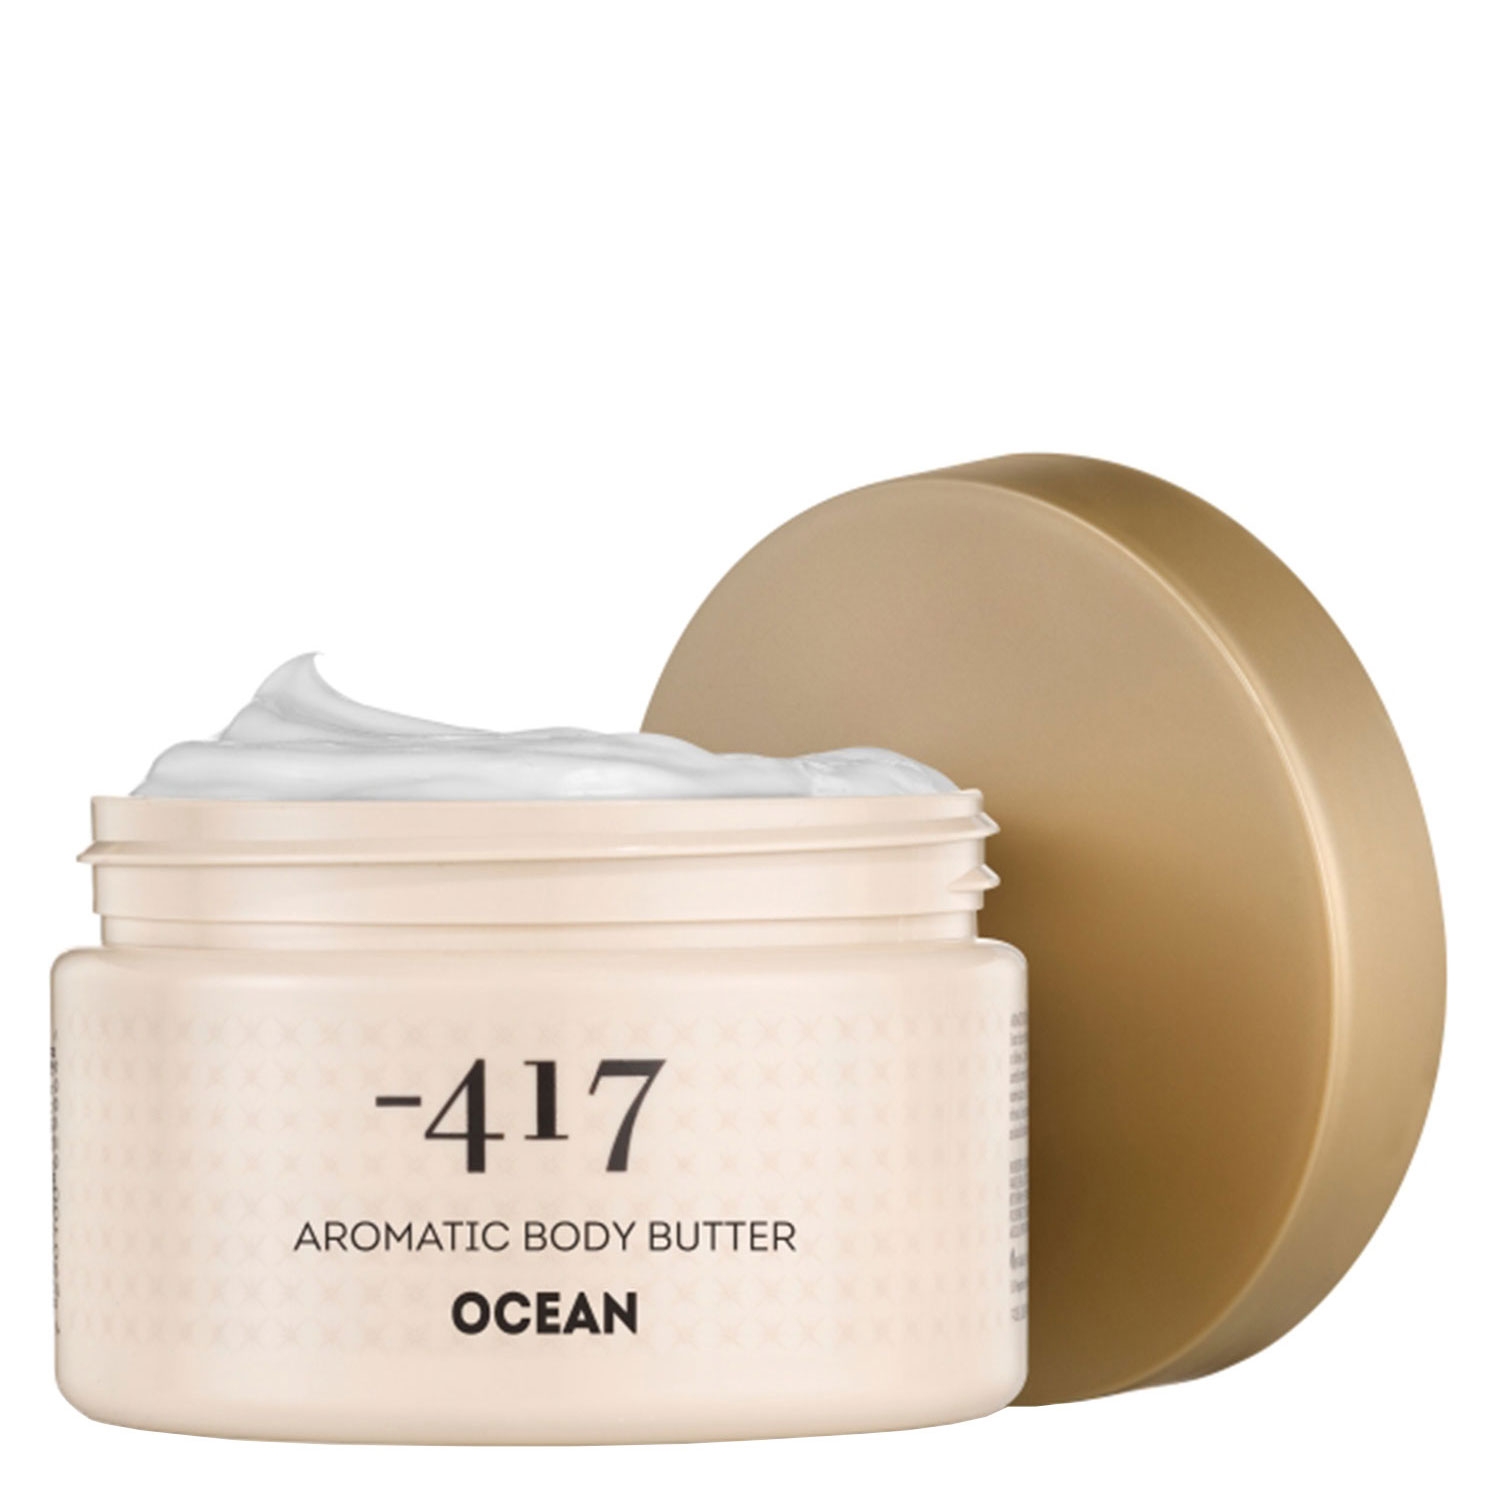 Product image from Minus 417 - Aromatic Body Butter Ocean